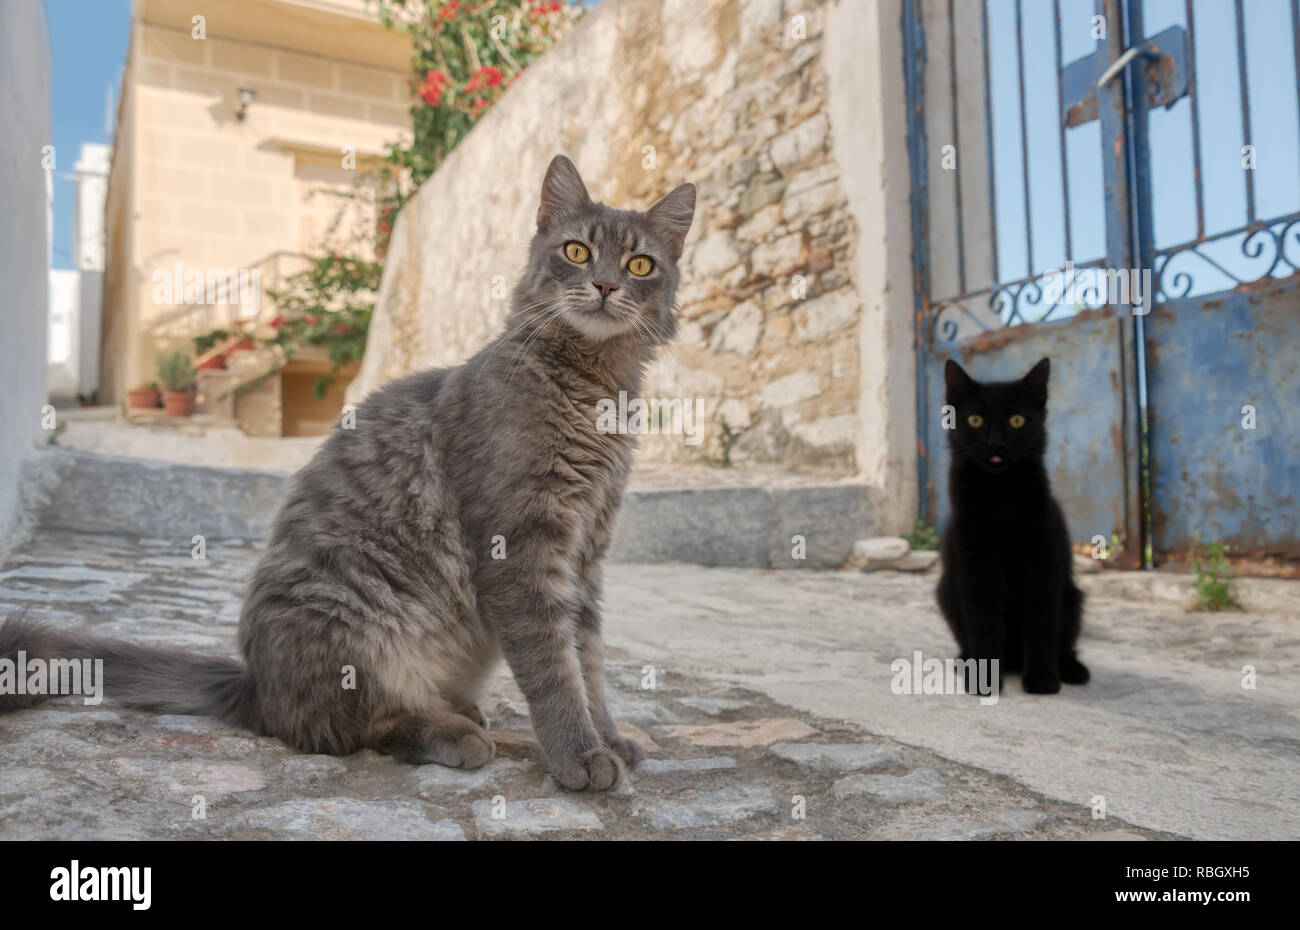 Cute cats sitting in a narrow Greek alleyway, Syros, Cyclades, Greece Stock Photo